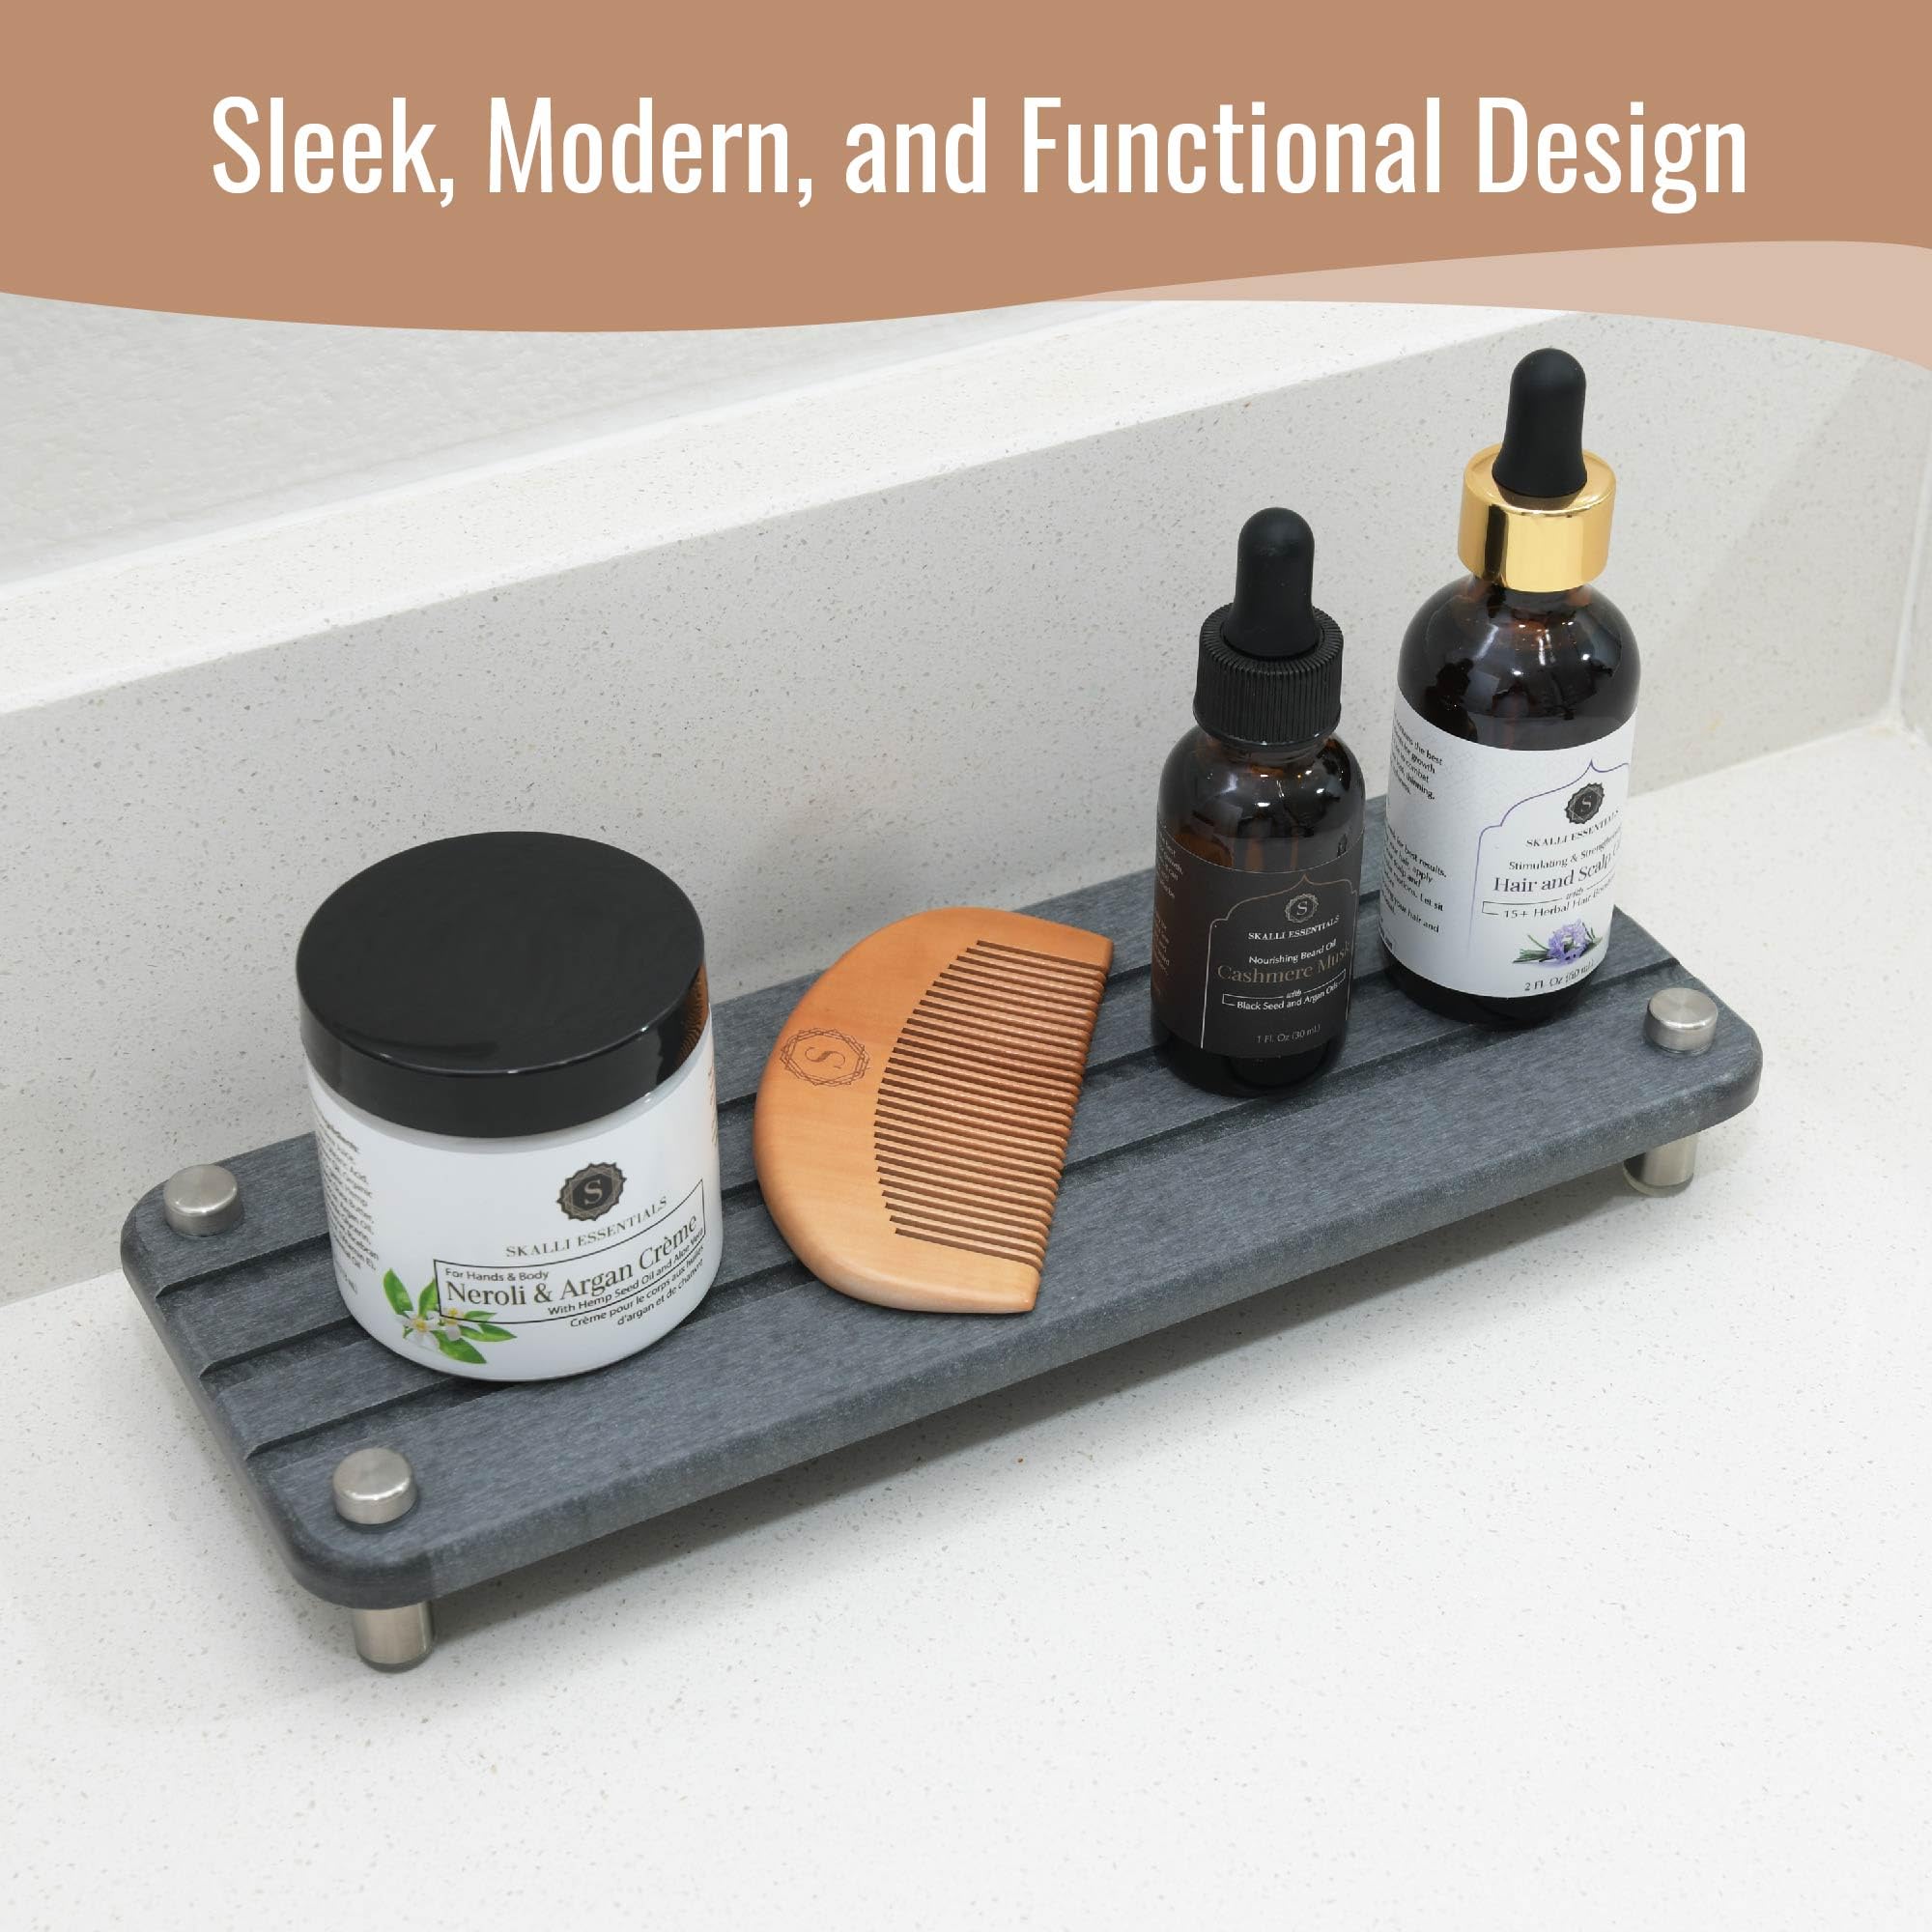 Skalli Essentials Instant Dry Sink Caddy Organizer - Quick Dry Stone Sink Tray for Kitchen & Bathroom - Hand Soap Tray, Soap Dispenser Tray - Sleek White or Black Soap Tray & Accessory Tray (Slate)